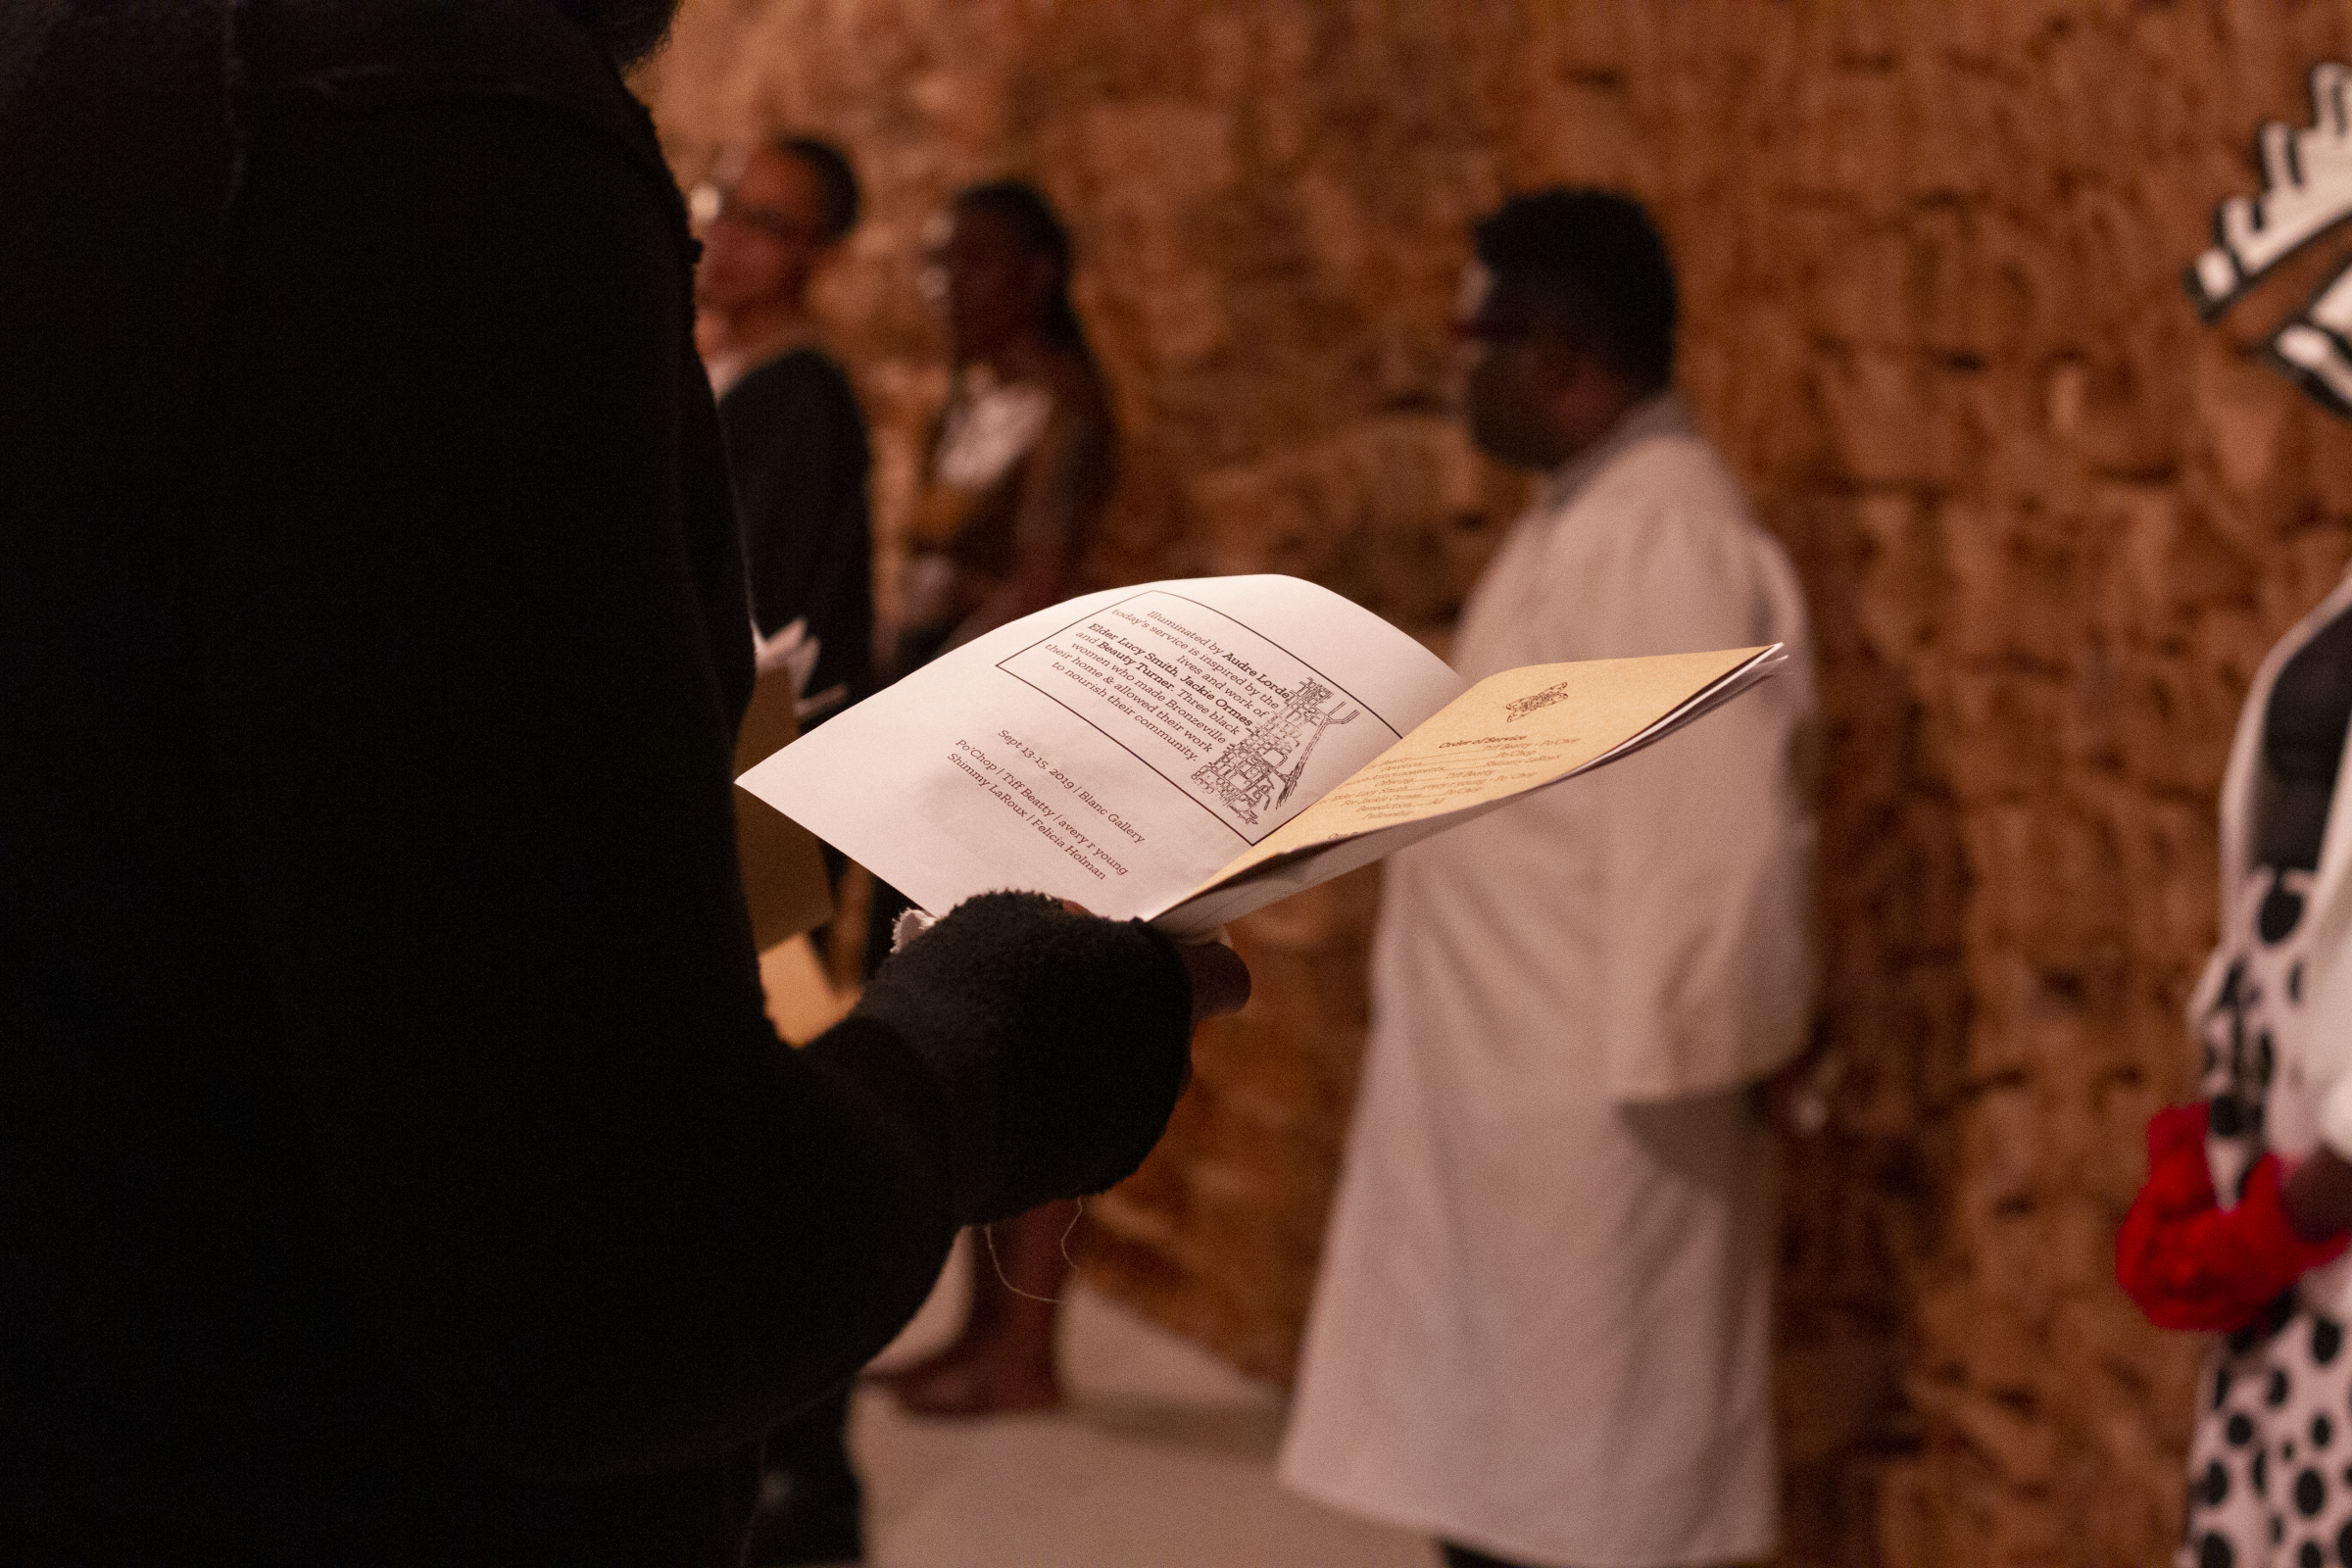 A photo of an audience member holding a program from The People’s Church of the G.H.E.T.T.O with Tiff, Jenn, and avery standing in the background. Photo by Candice Majors.